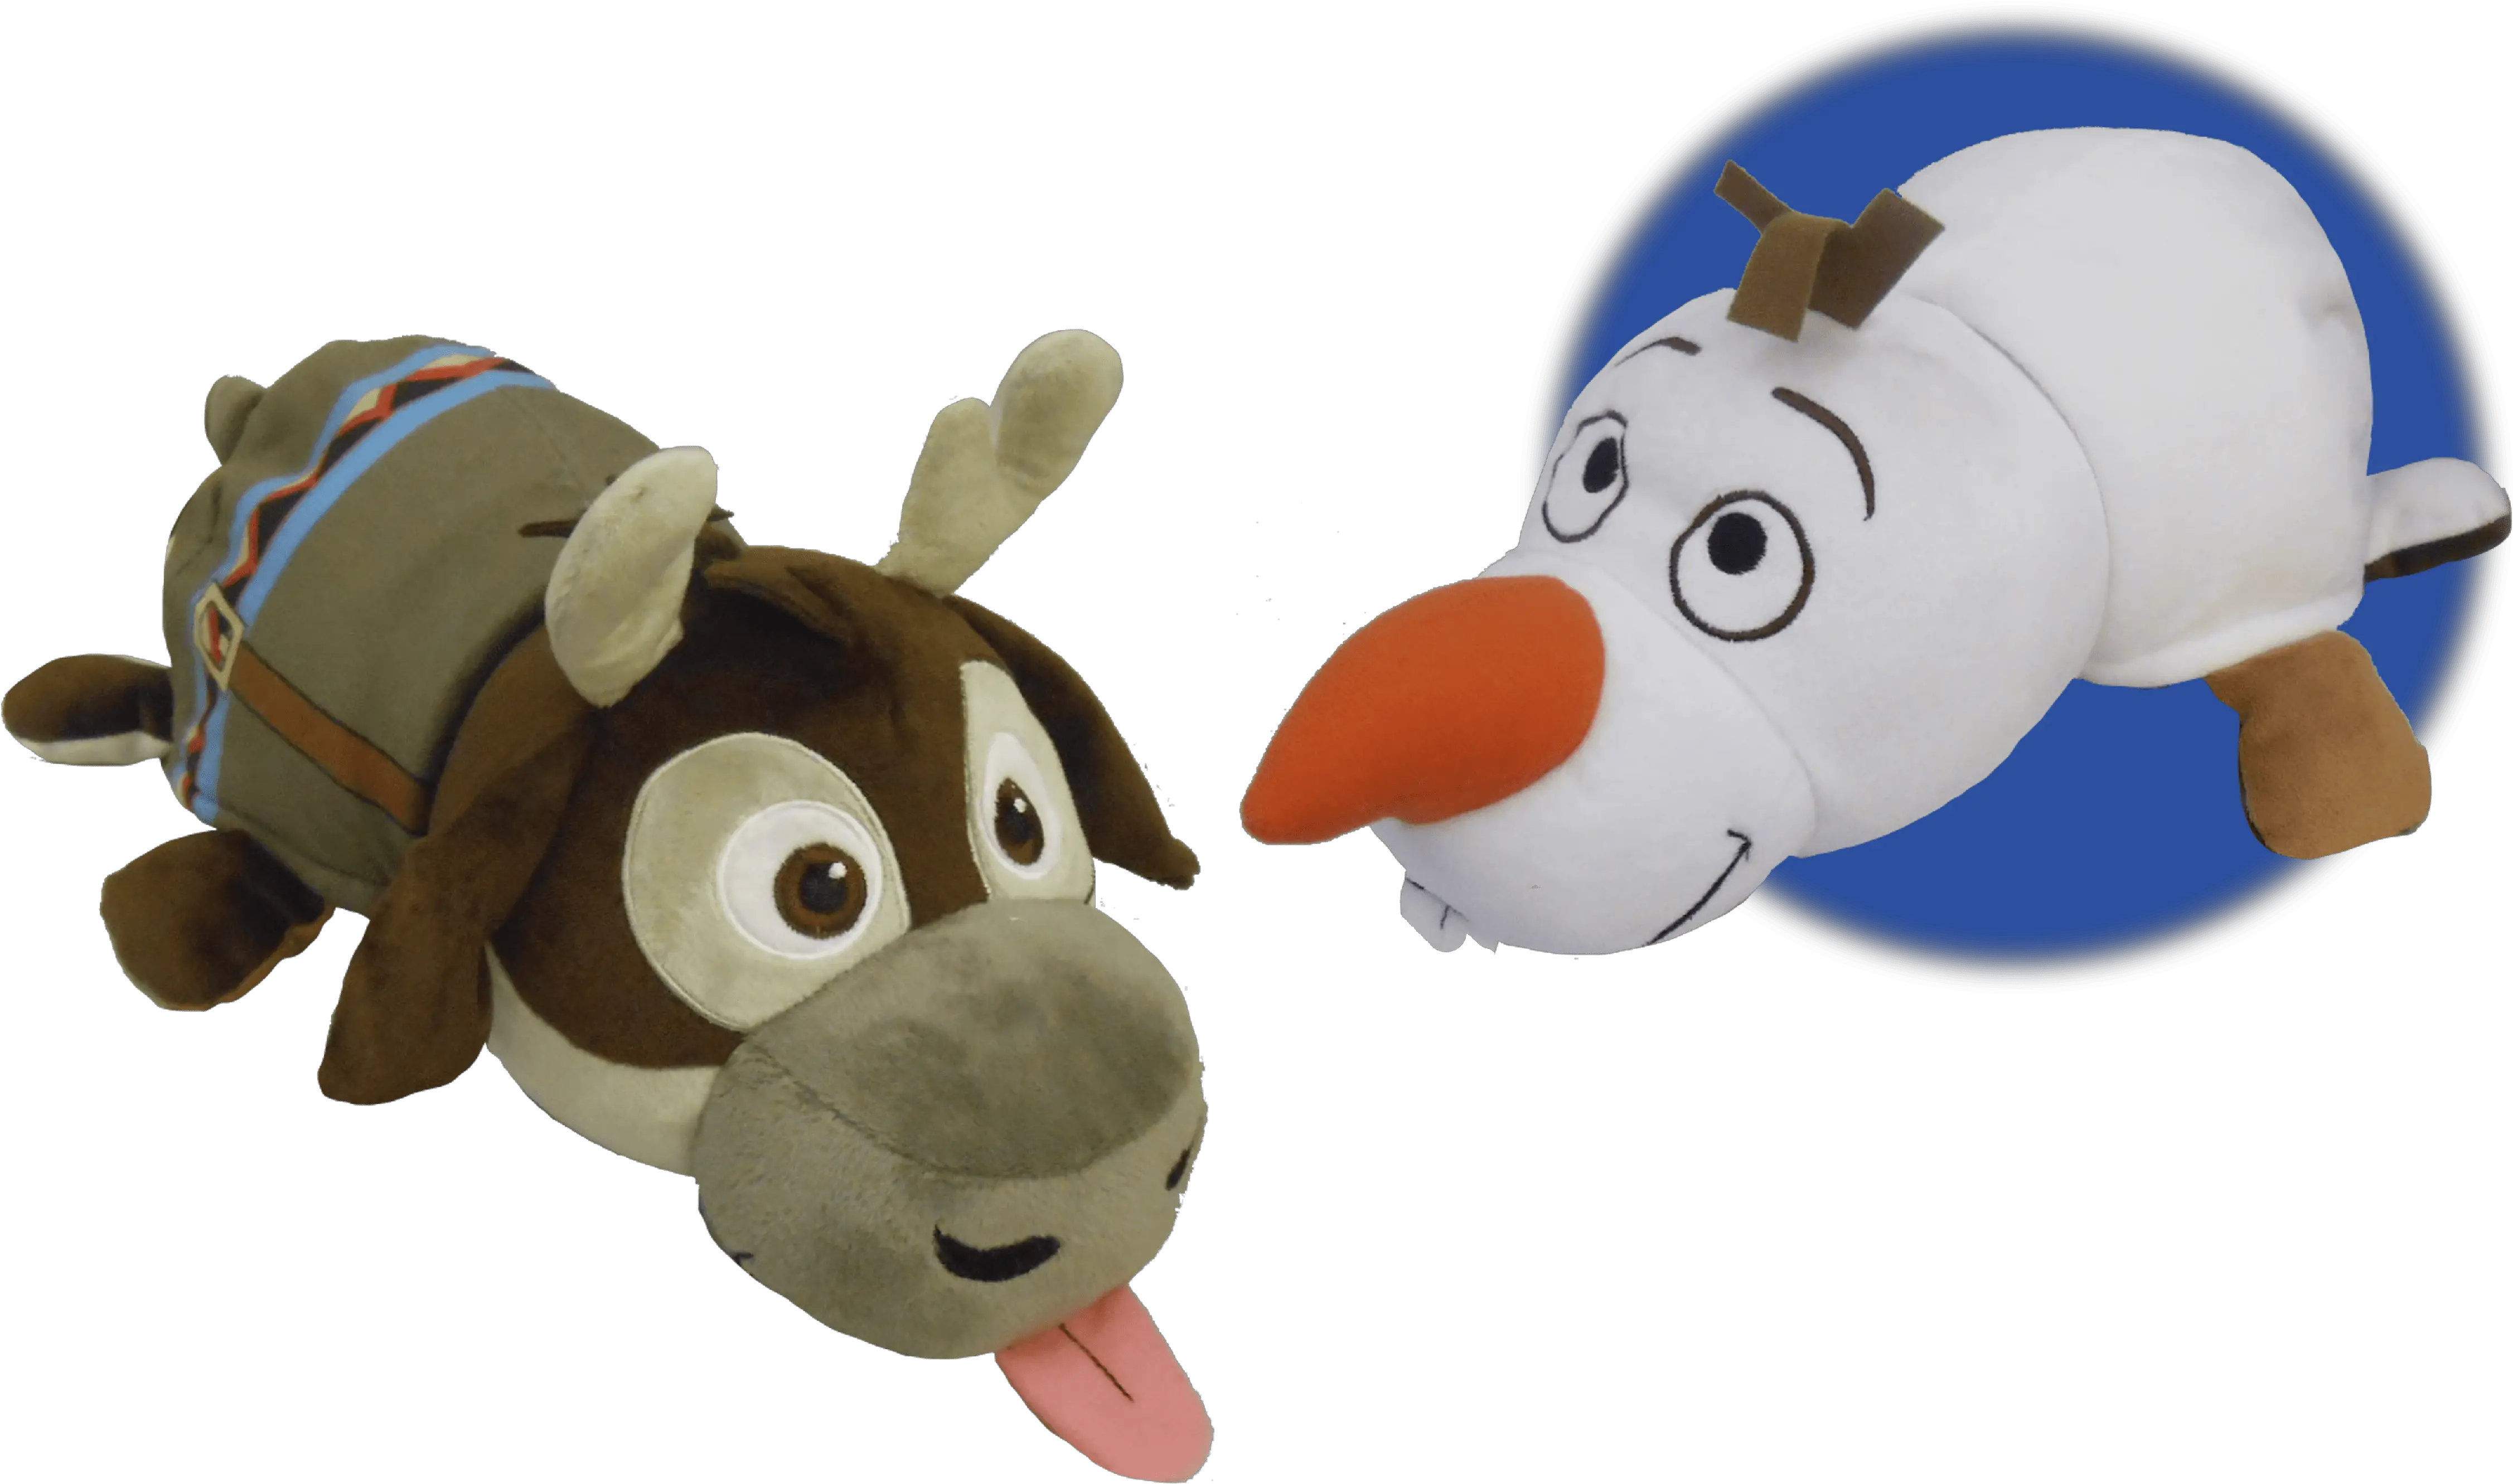 14 Disney Frozen Olaf To Sven Flipazoo 2 In 1 Plush Best Peluche Olaf Y Sven Png Olaf Transparent Background